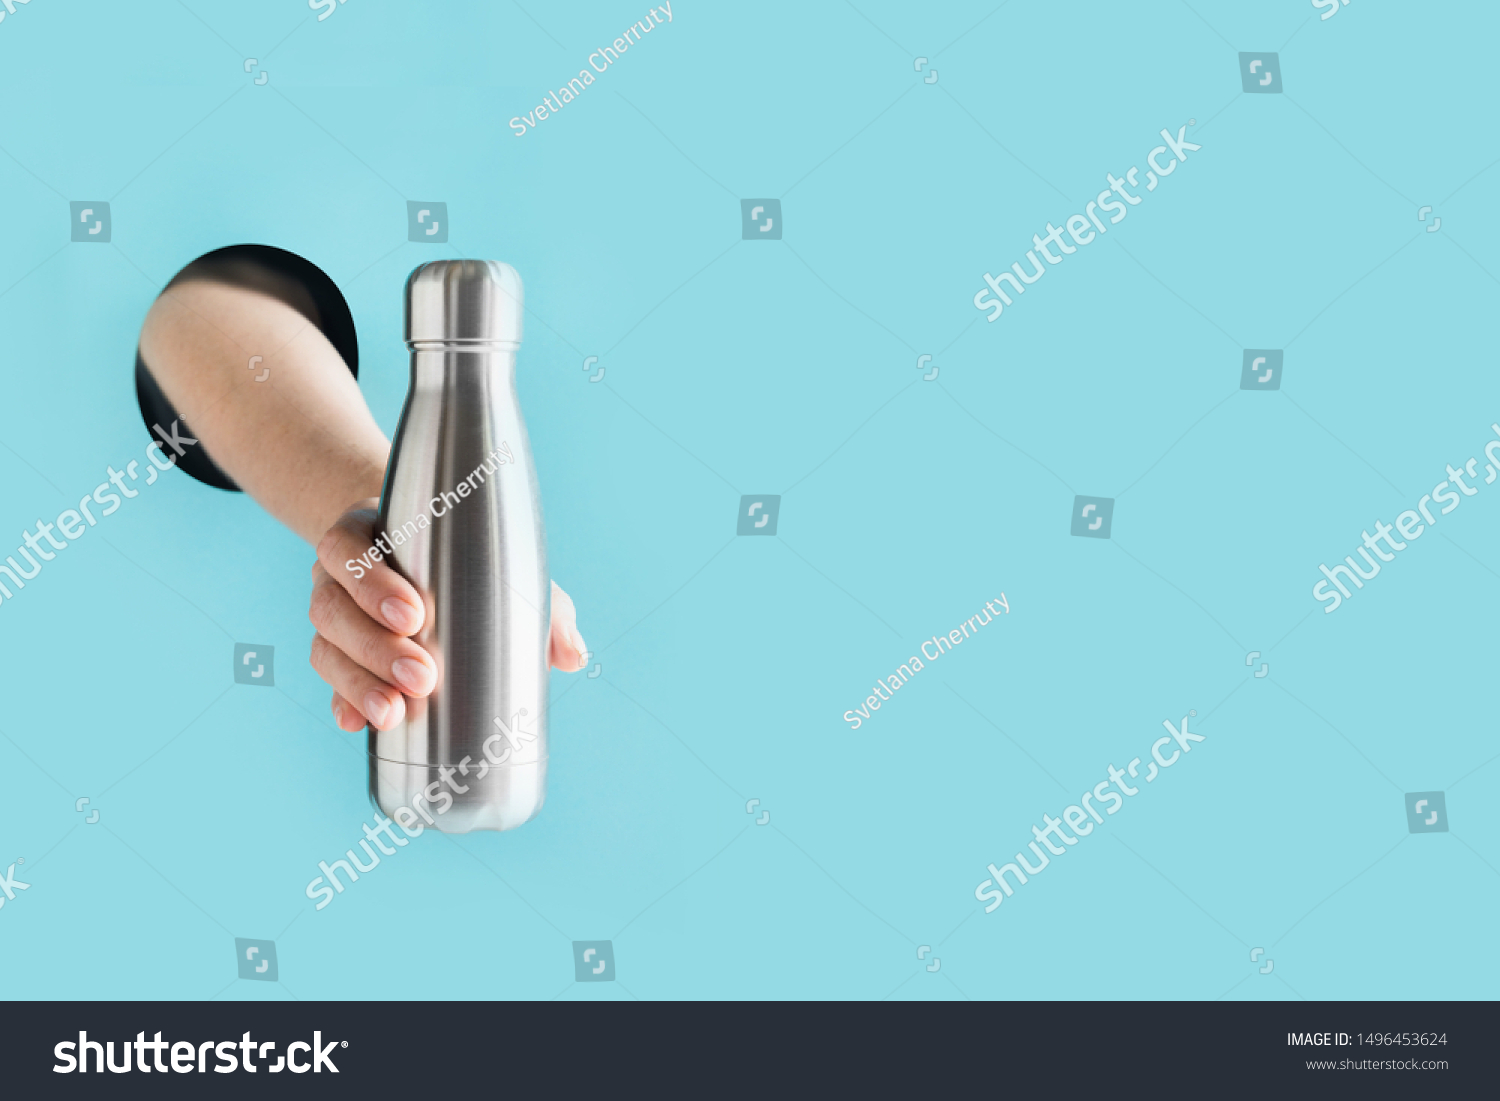 Reusable metal bottle for drinks in female hand through the hole in paper. Individual use. Save the planet. Zero waste concept. Plastic free. #1496453624